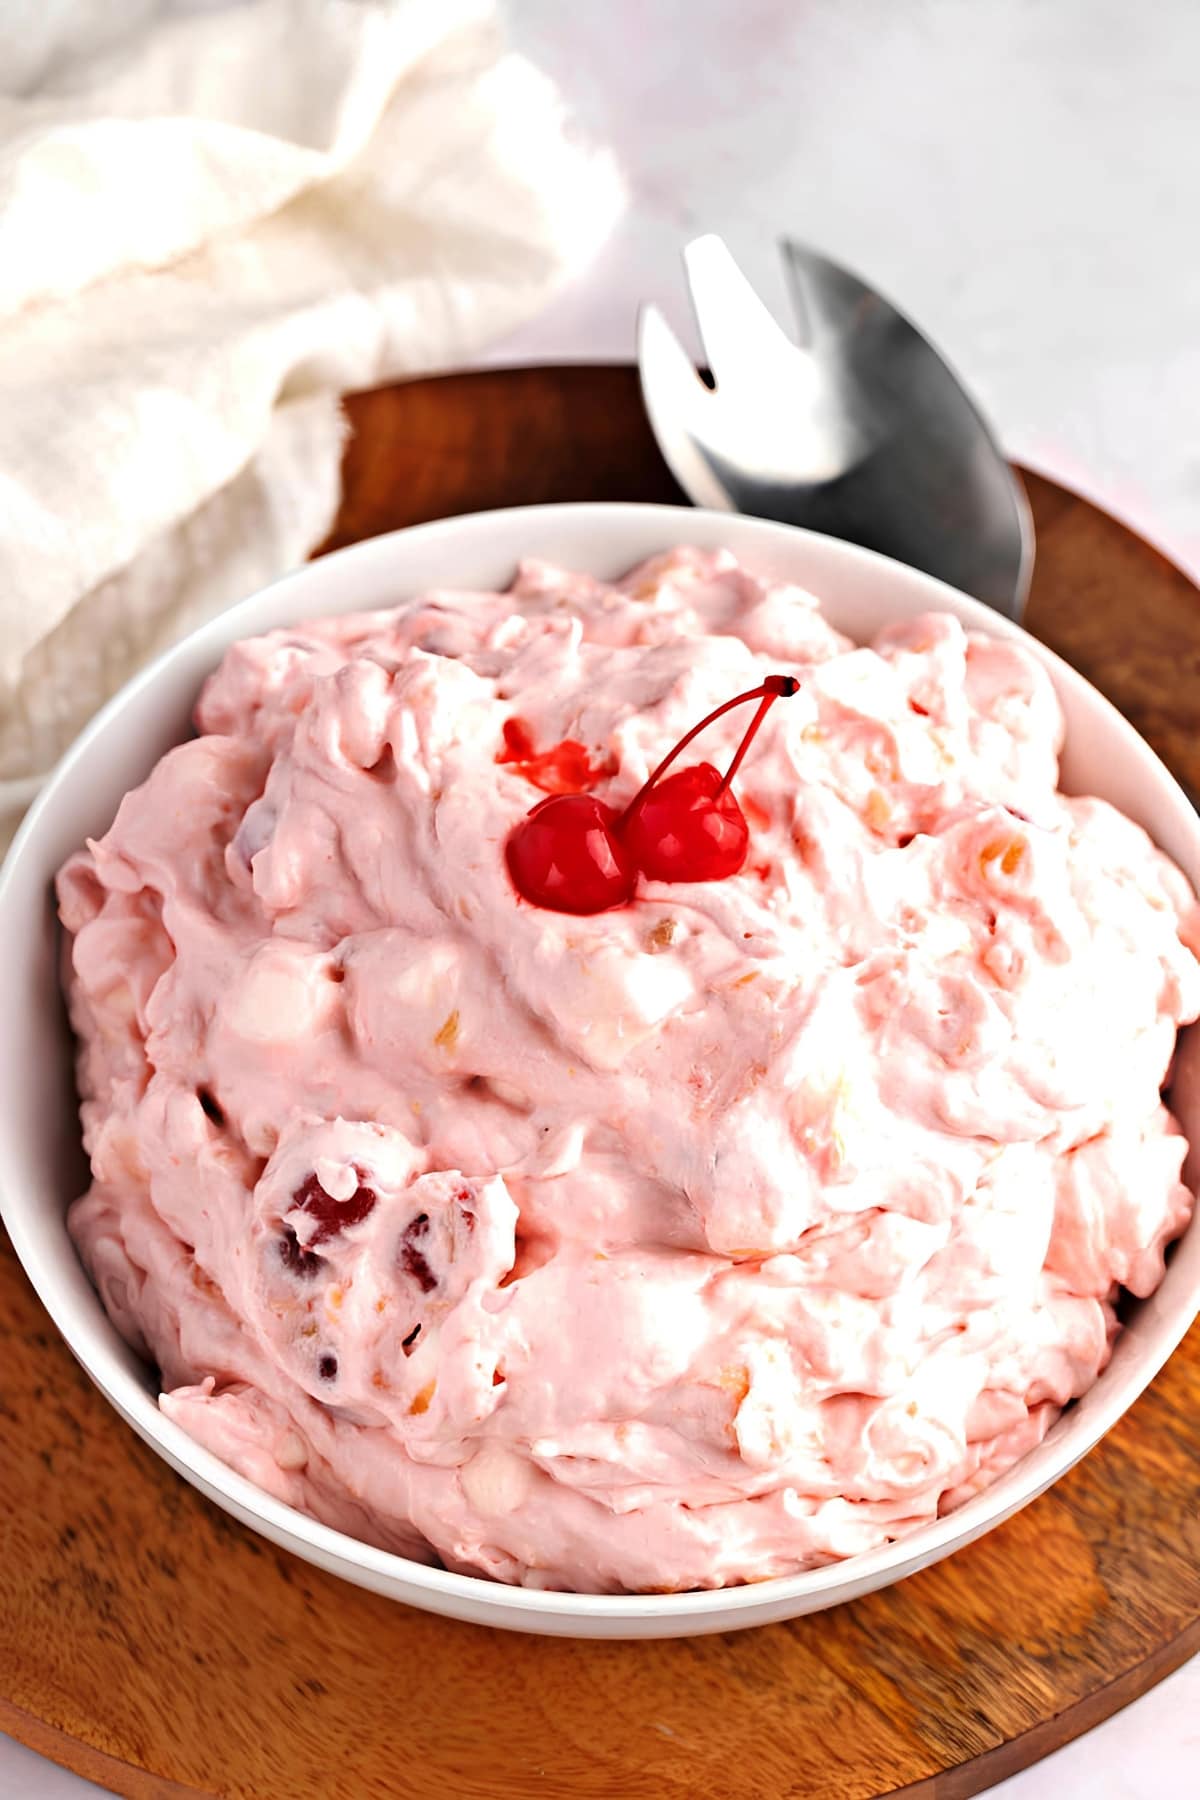 Best Cherry Fluff (Easy Dessert Salad) featuring Cherry Fluff in a White Bowl on a Wooden Cutting Board